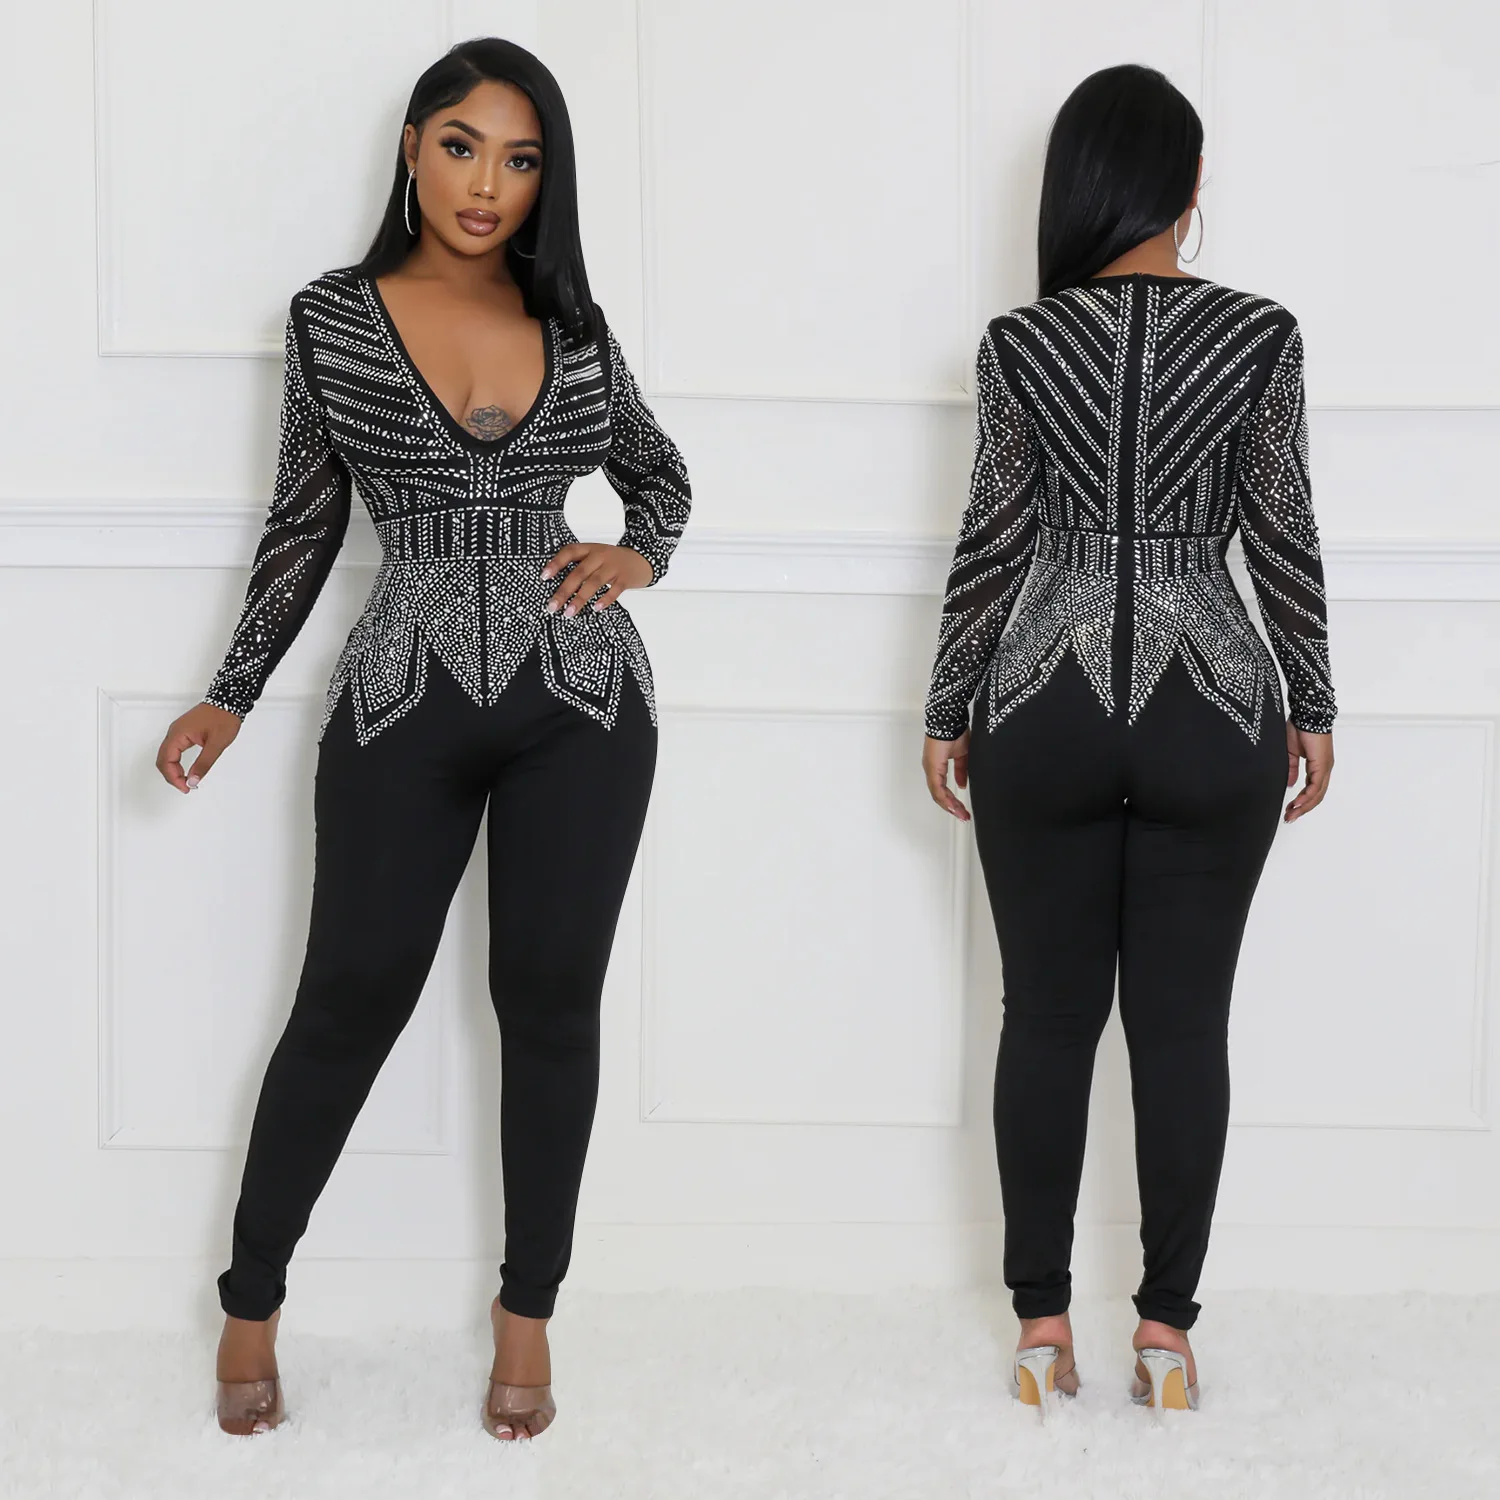 Women's V-Neck Long Sleeved Jumpsuit, Monochromatic Pants, Hot Diamond, European and American Fashion, Amazon Hot Selling sexy chic women one shoulder jumpsuit chiffon long sleeve prom party clothes designer one piece ruffles rompers 2023